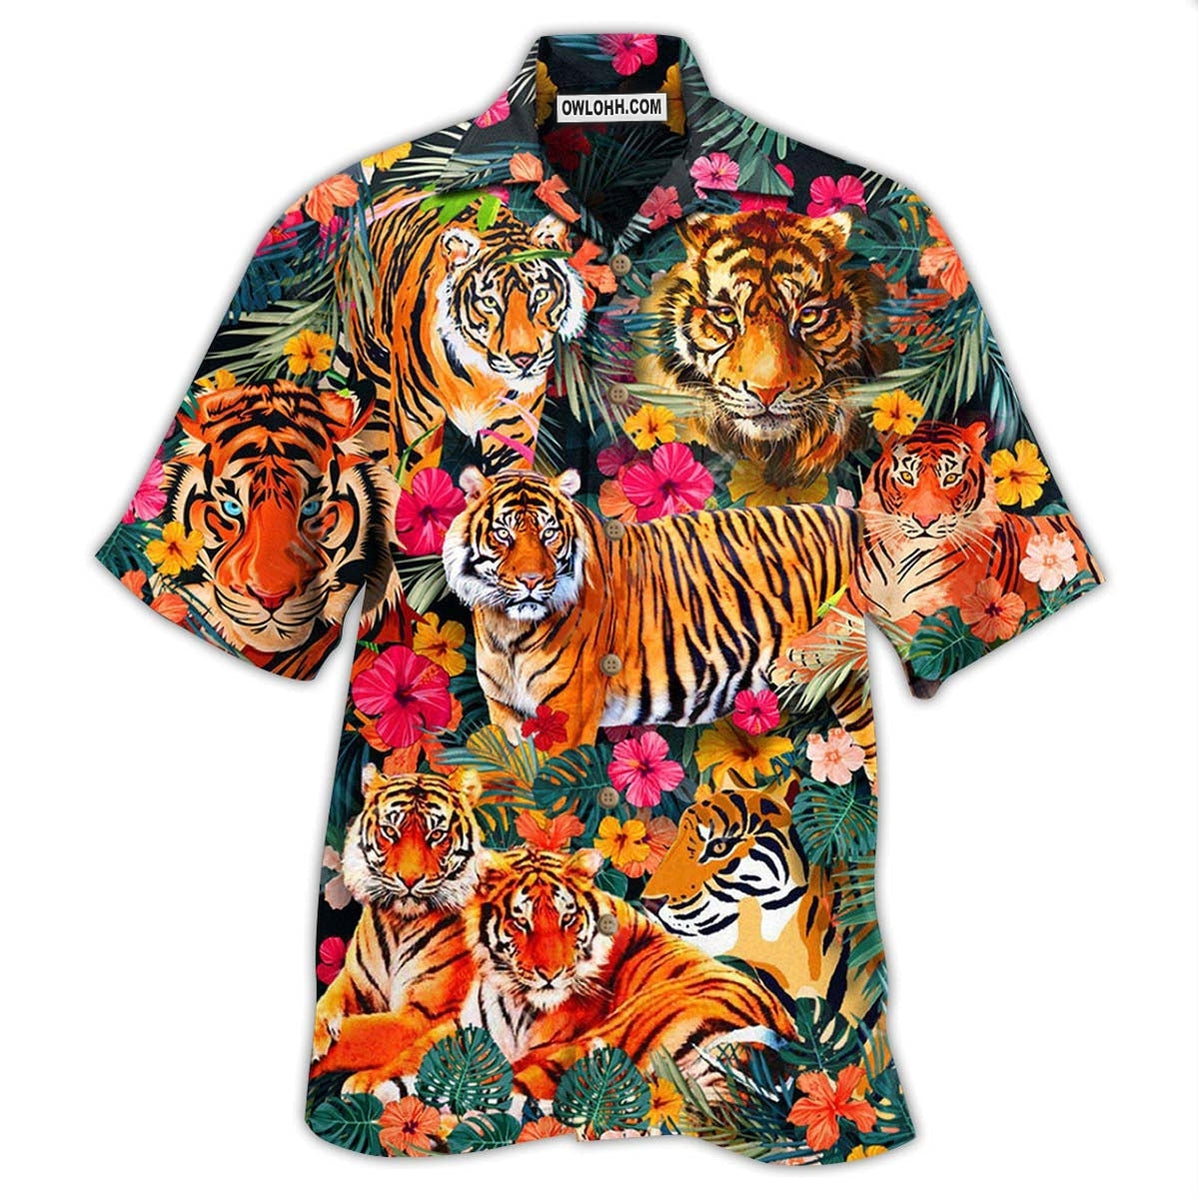 Tiger Be A Jungle Tiger Not A Zoo Tiger - Hawaiian Shirt - Owl Ohh for men and women, kids - Owl Ohh